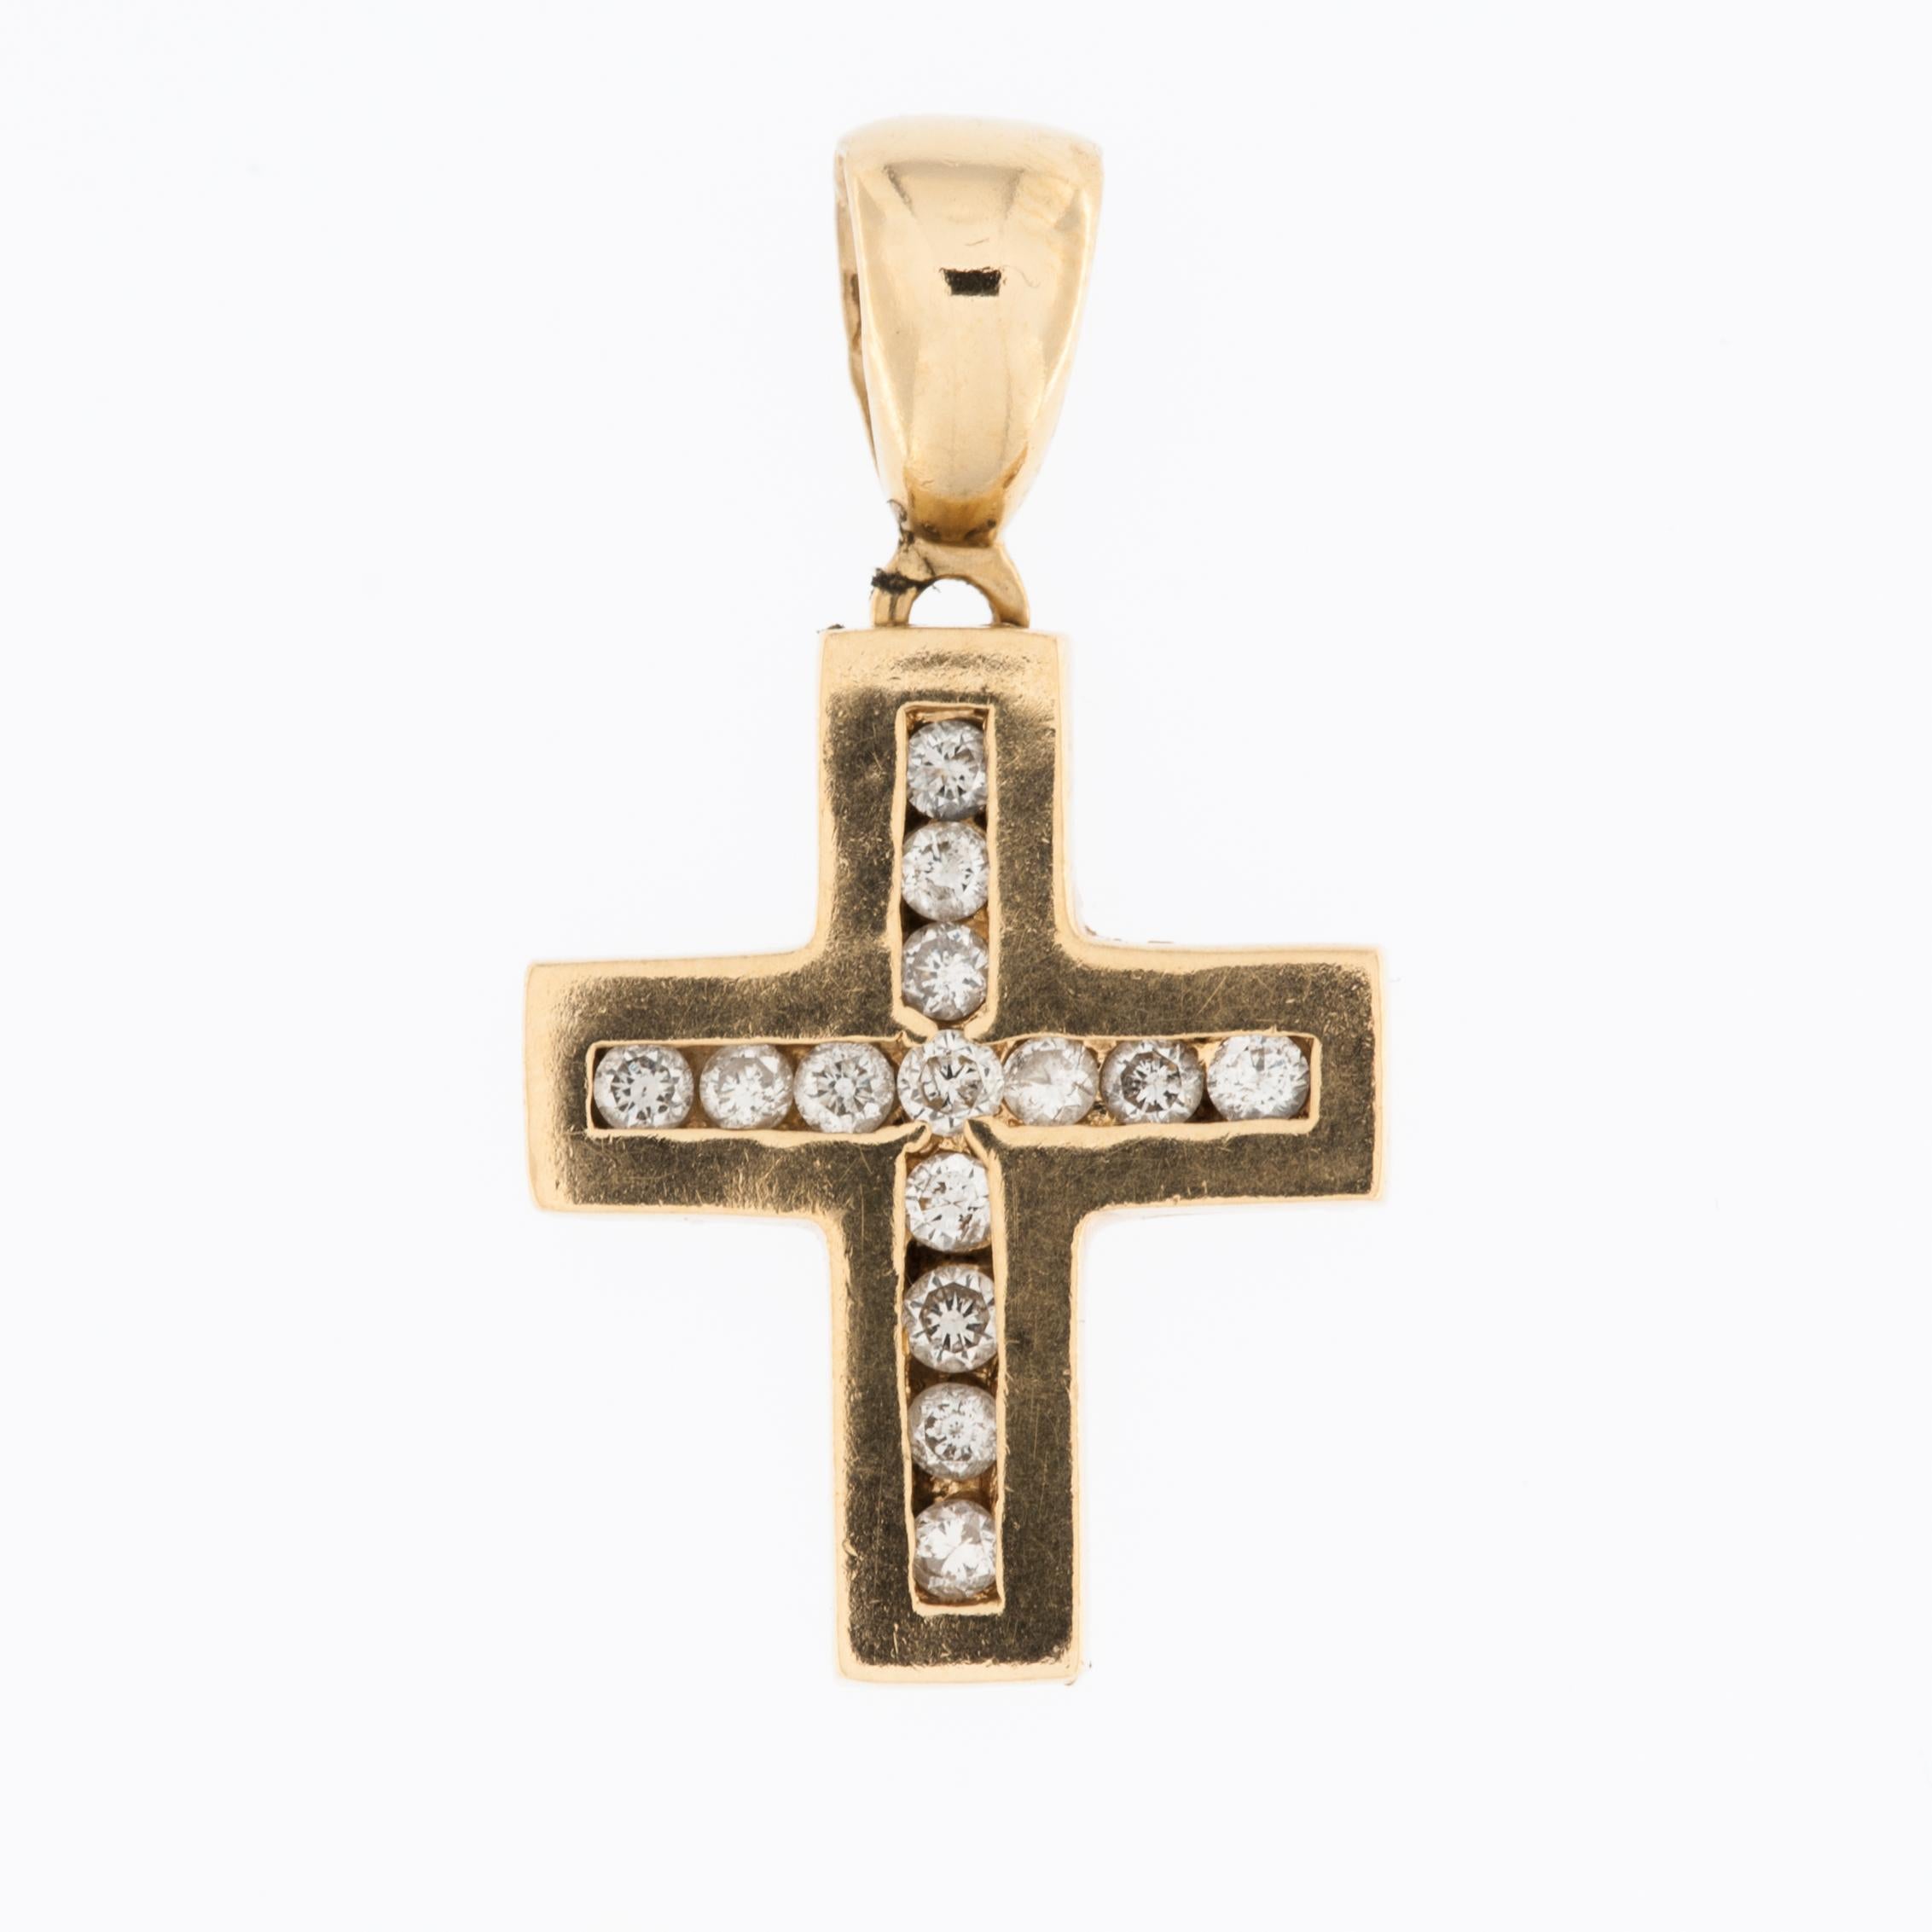 The French Vintage 18kt Yellow Gold Cross with Diamonds is a beautiful piece of jewelry that exudes elegance and timeless charm.

This cross pendant is crafted from 18-karat yellow gold, which is known for its rich and warm color. The use of